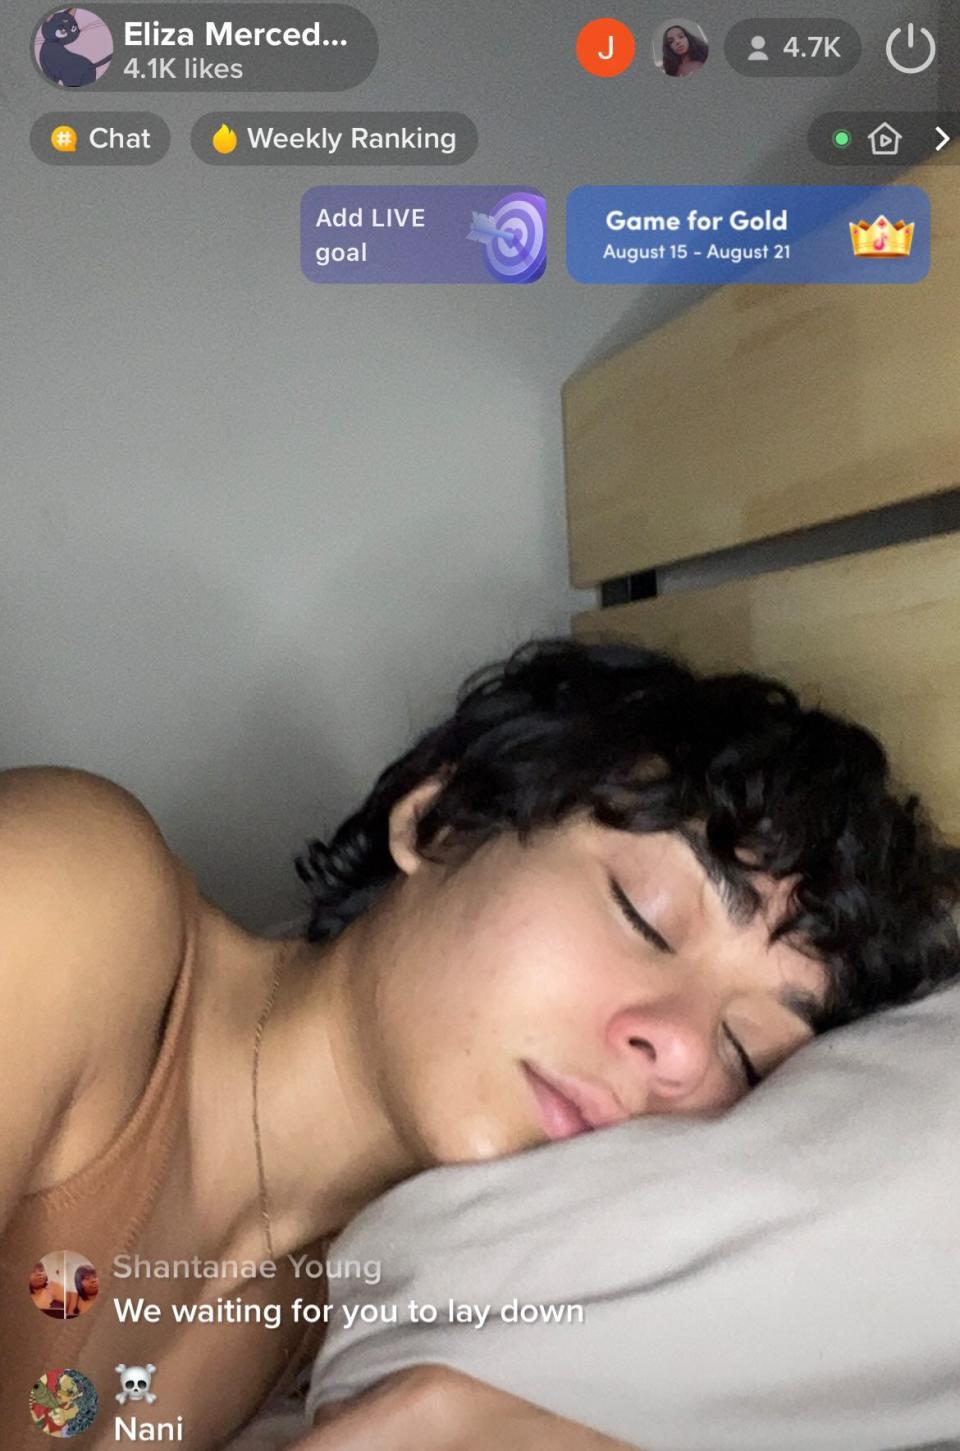 Eliza Diaz sleeping on livestream with comments like "we waiting for you to lay down" showing